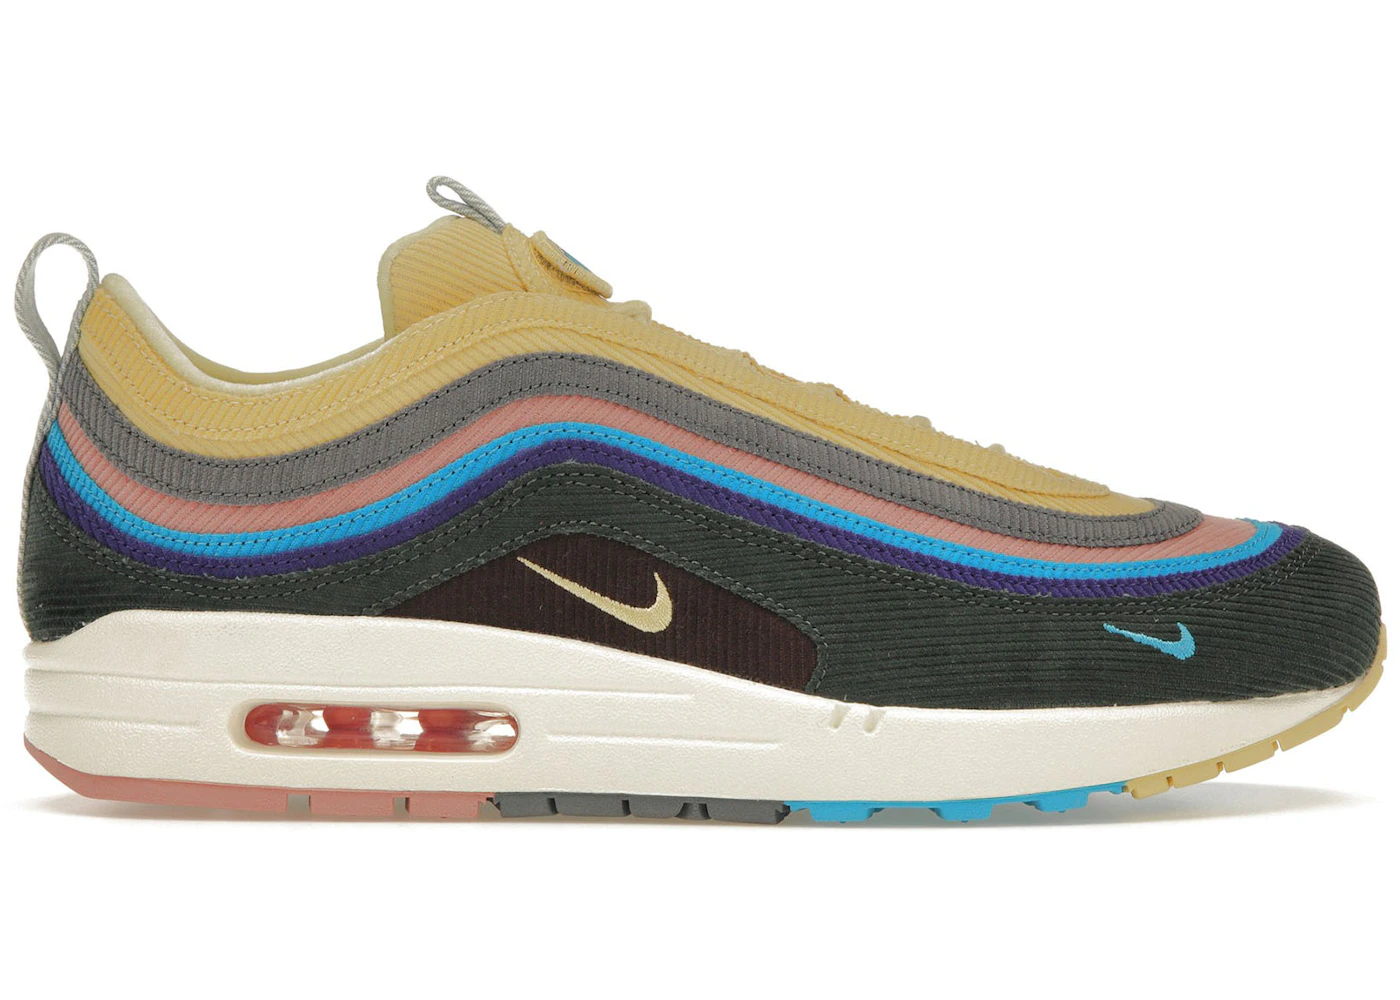 pedestal Omitido Recientemente Nike Air Max 1/97 Sean Wotherspoon (Extra Lace Set Only) Men's - AJ4219-400  - US